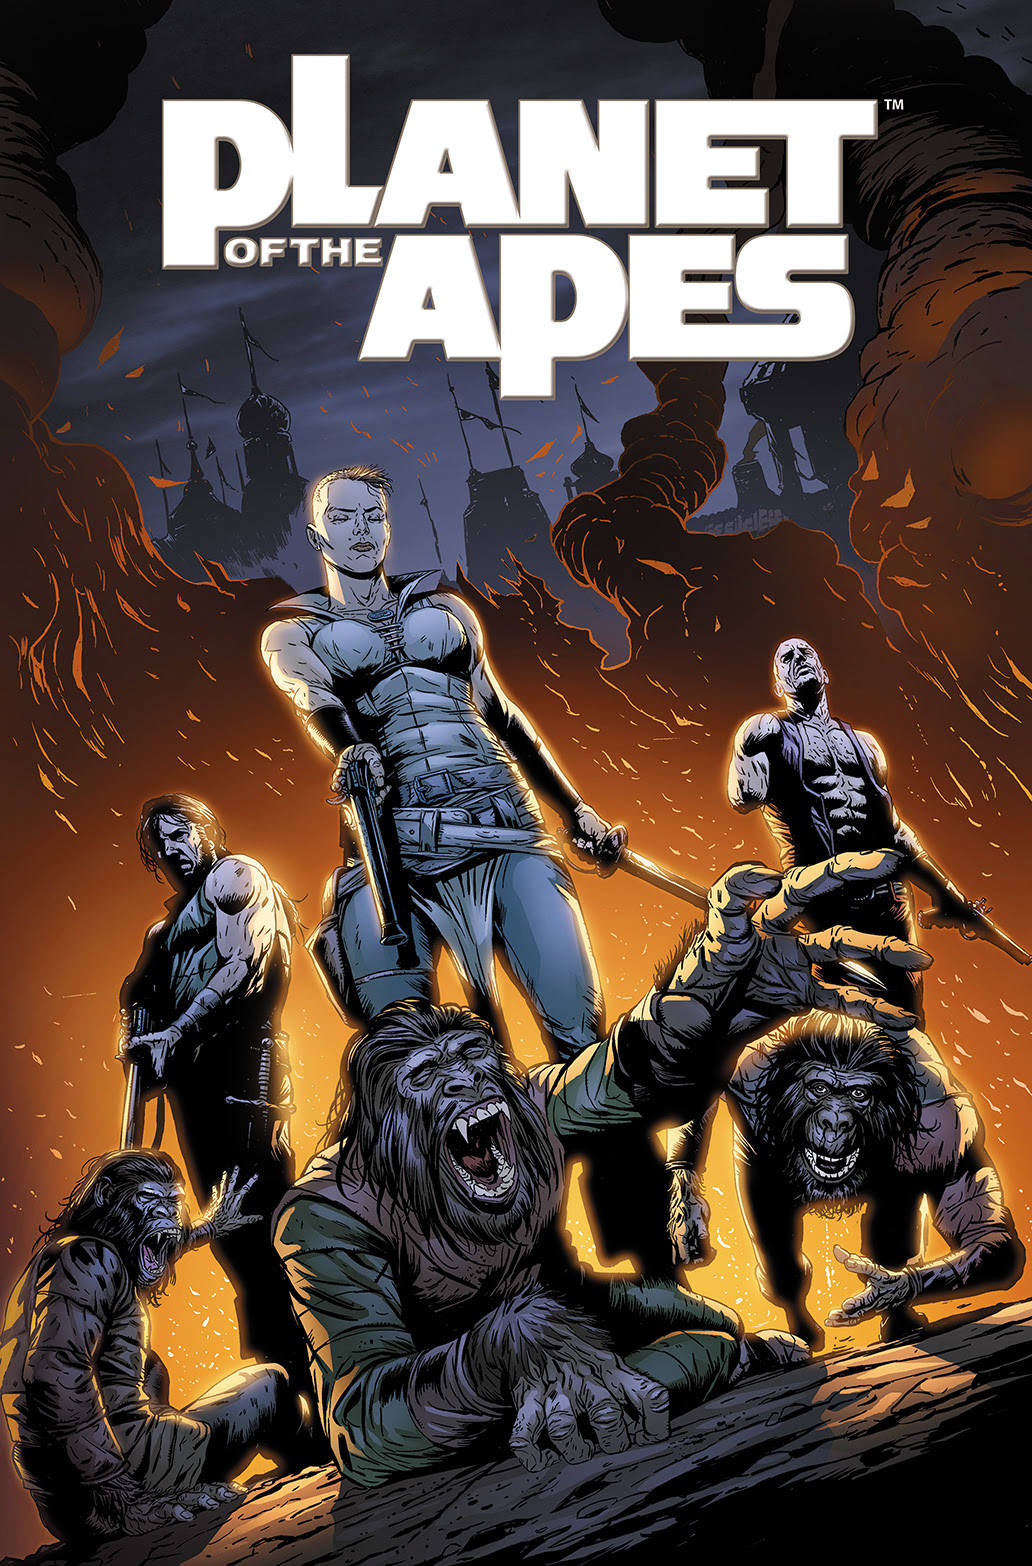 PLANET OF THE APES VOL. 5 TP Cover by Marek Oleksicki